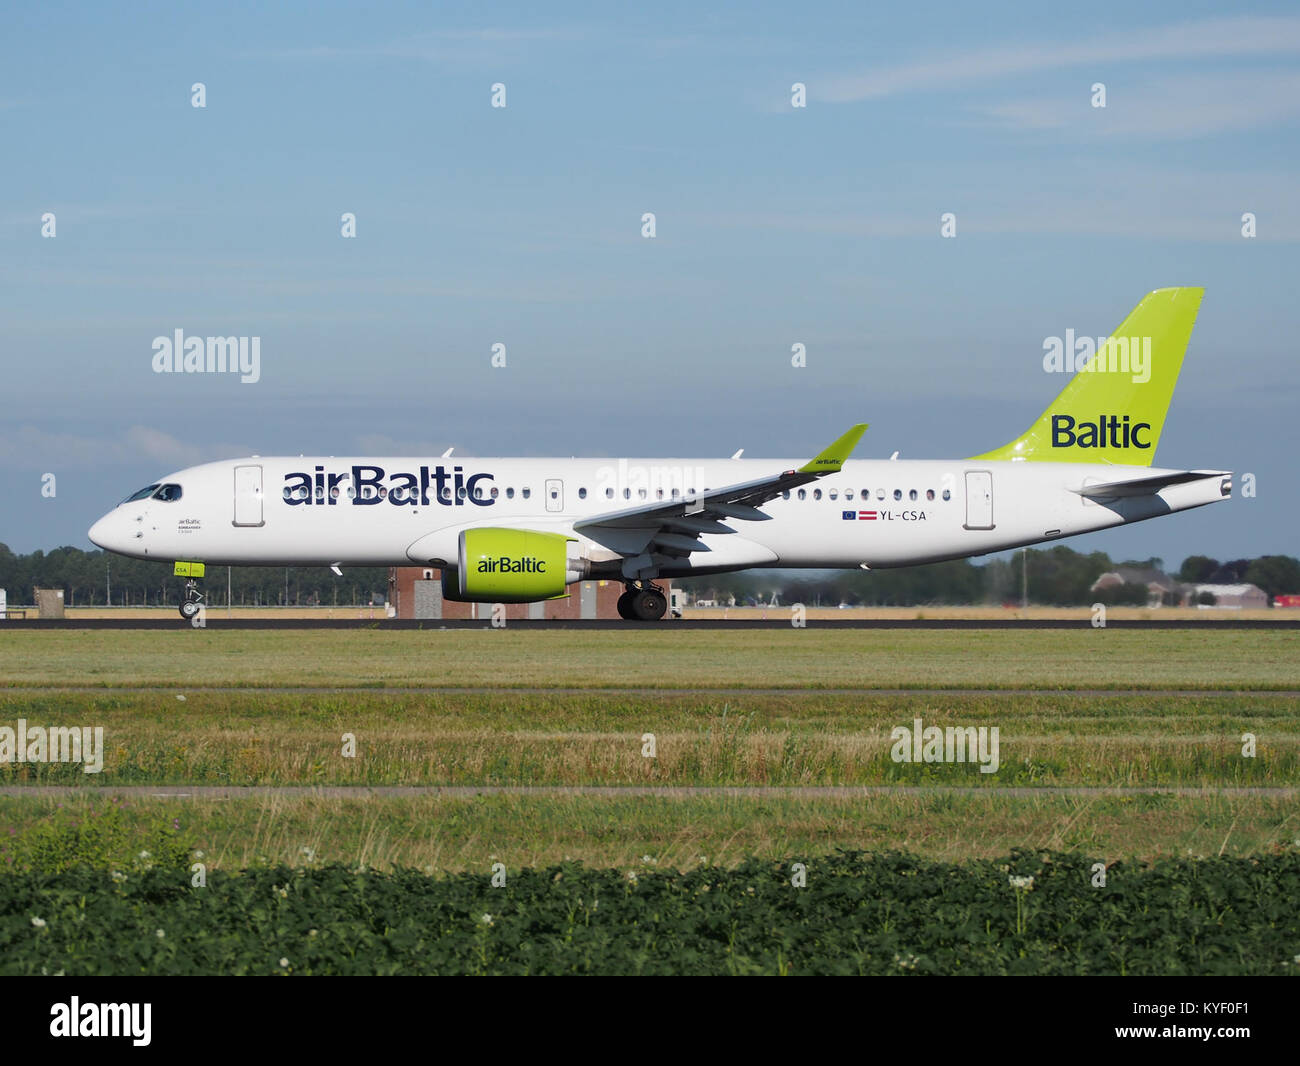 YL-CSA AirBaltic CS300 Bombardier takeoff from Schiphol (AMS - EHAM), The Netherlands pic2 Stock Photo